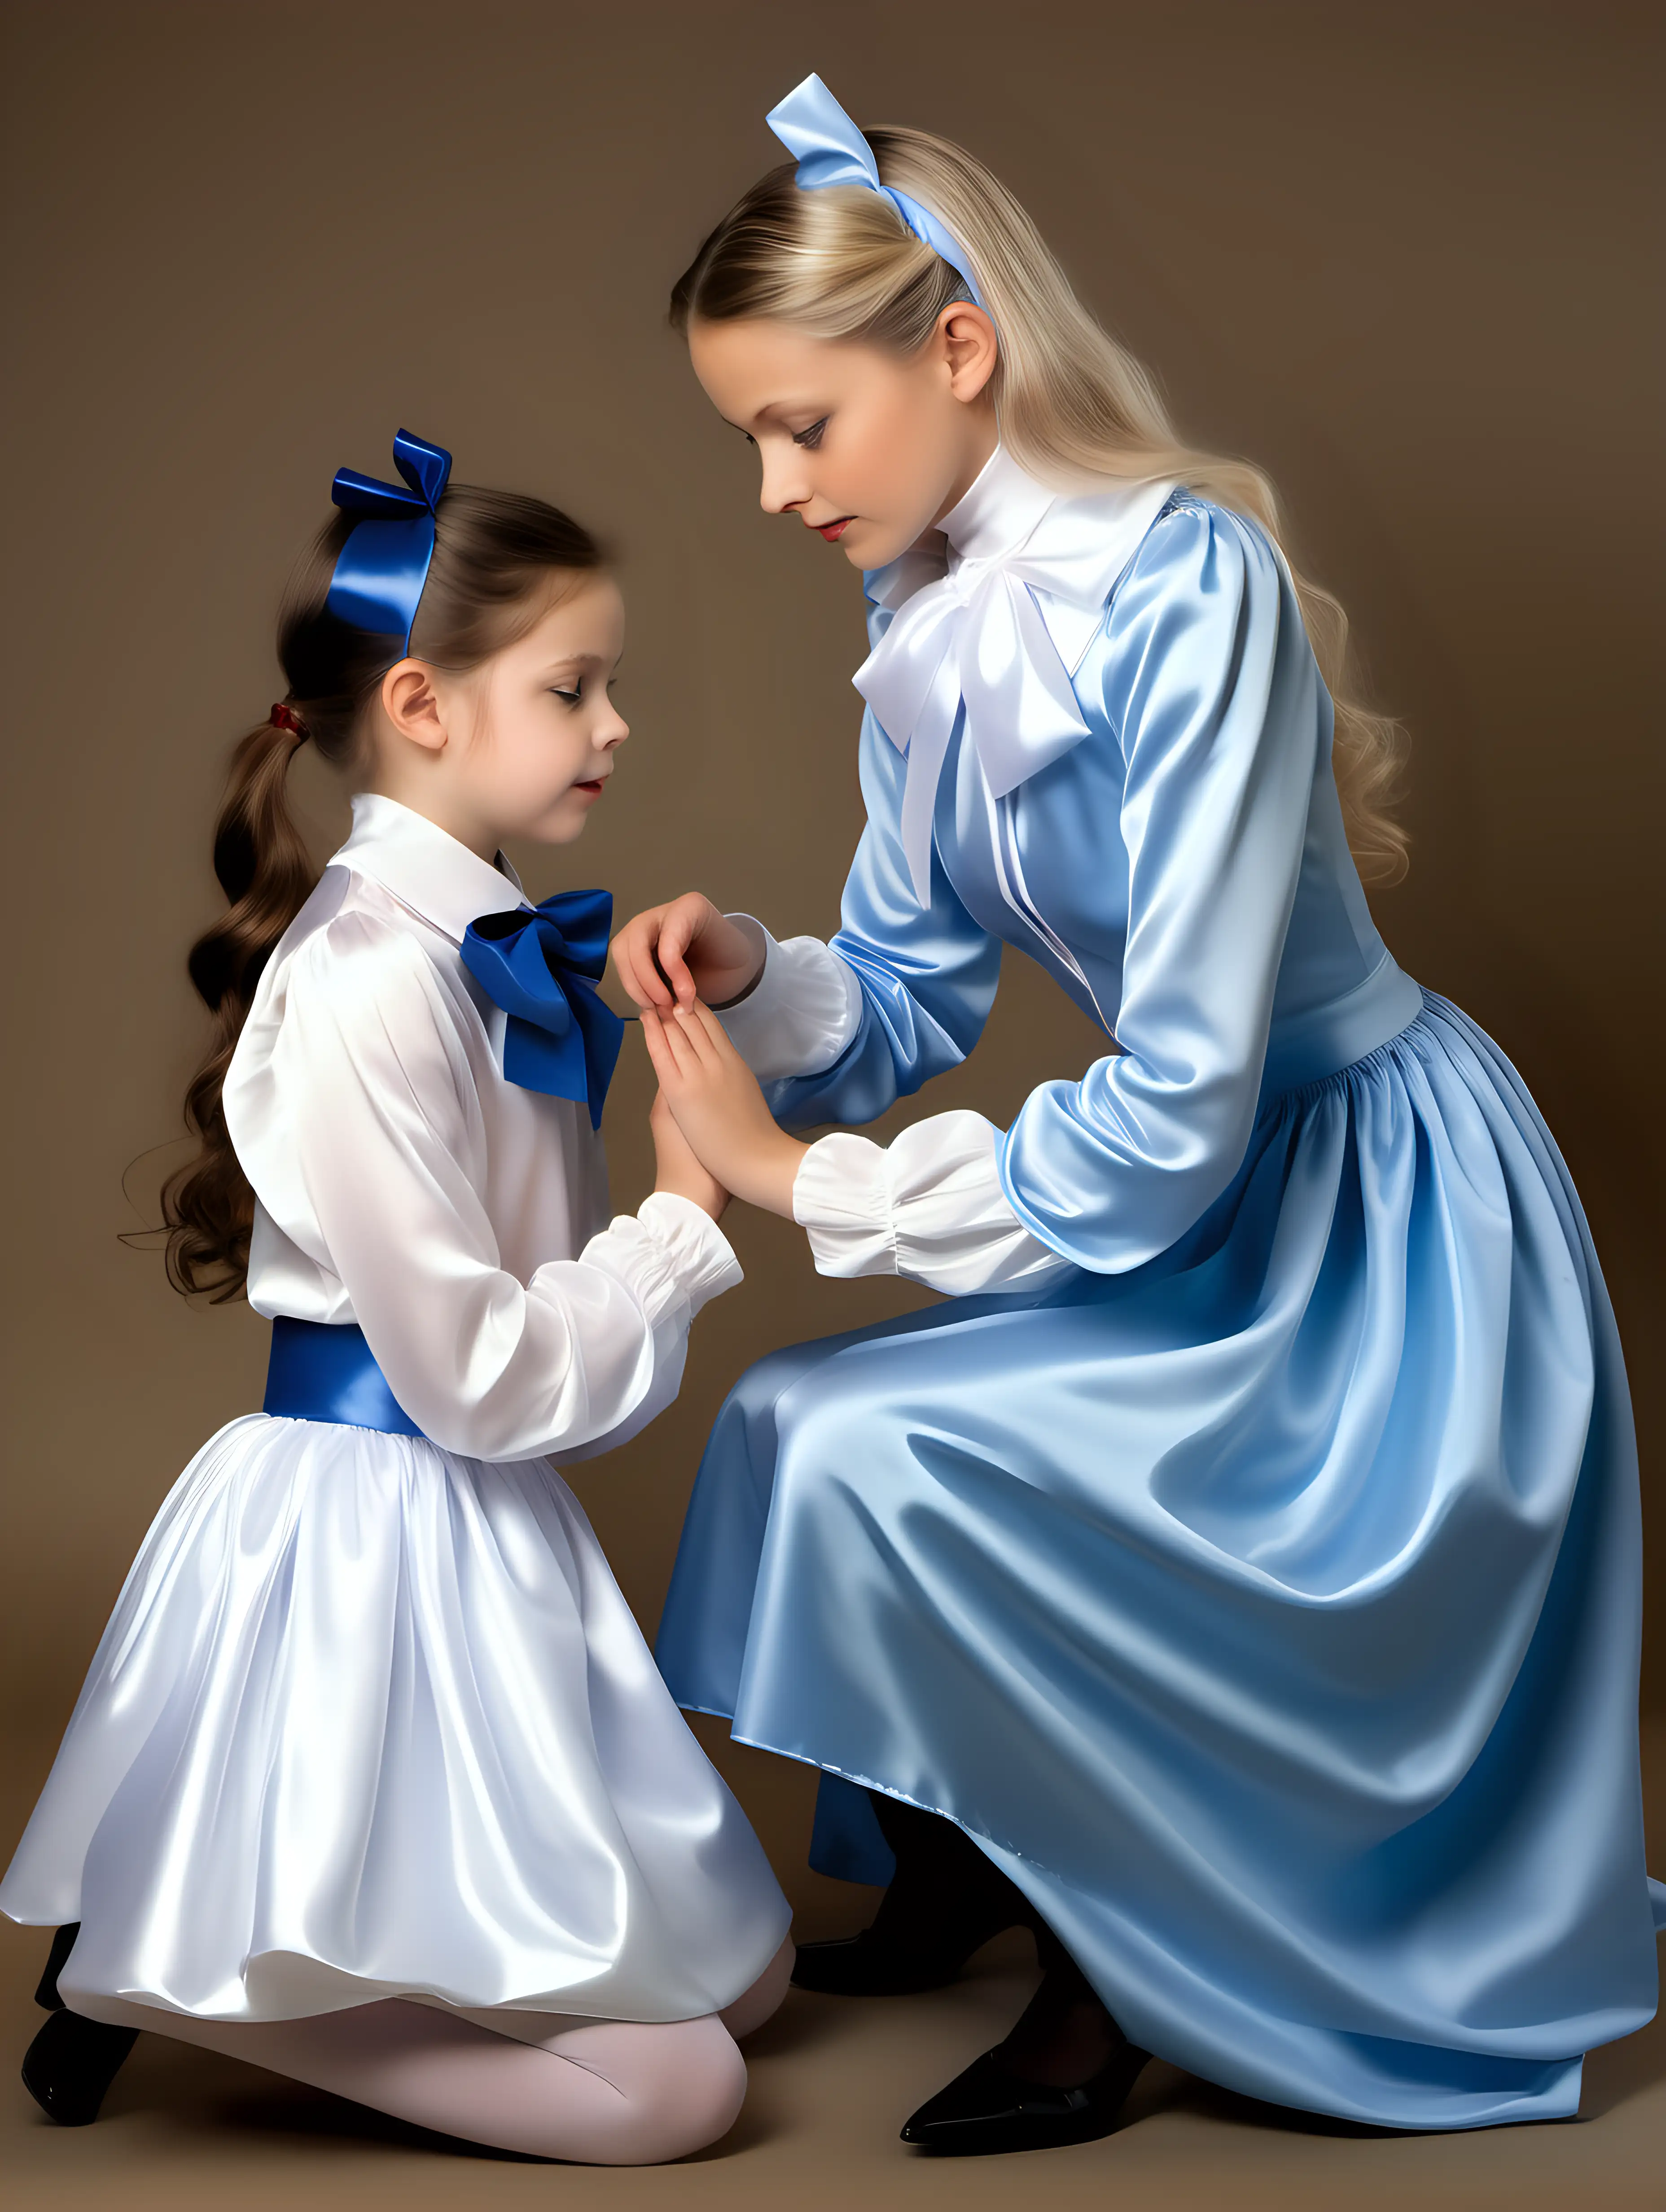 Young Girl Kneeling Before Fairy Godmother with Mother in Faery Costume